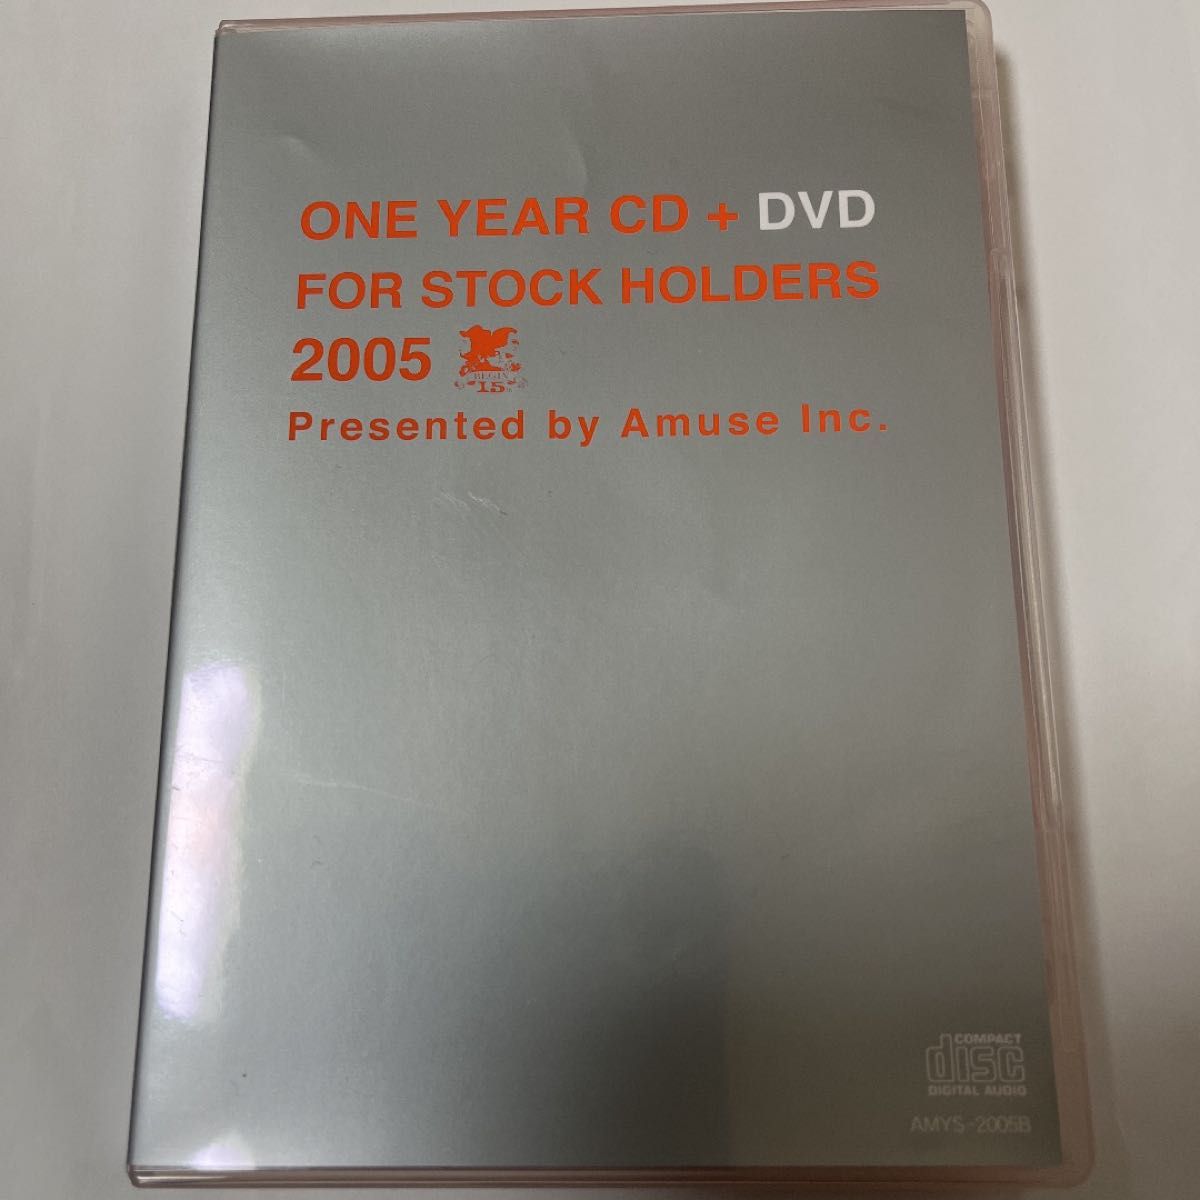 ONE YEAR CD ＋ DVD FOR STOCK HOLDERS 2005